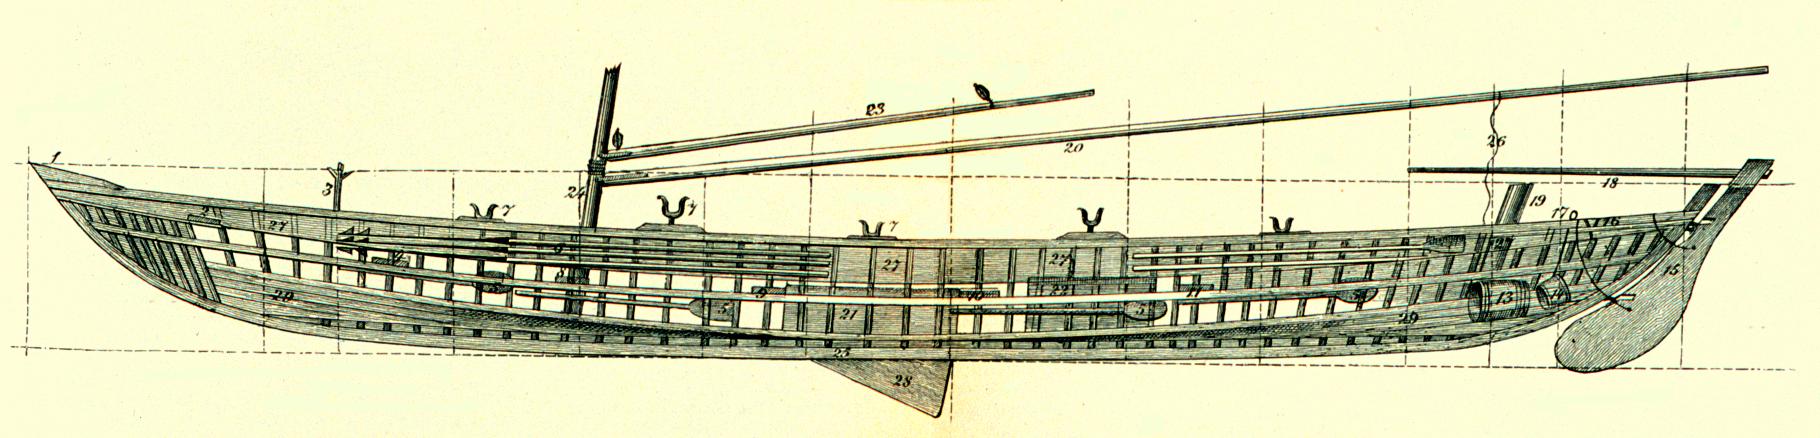 Section of whale boat